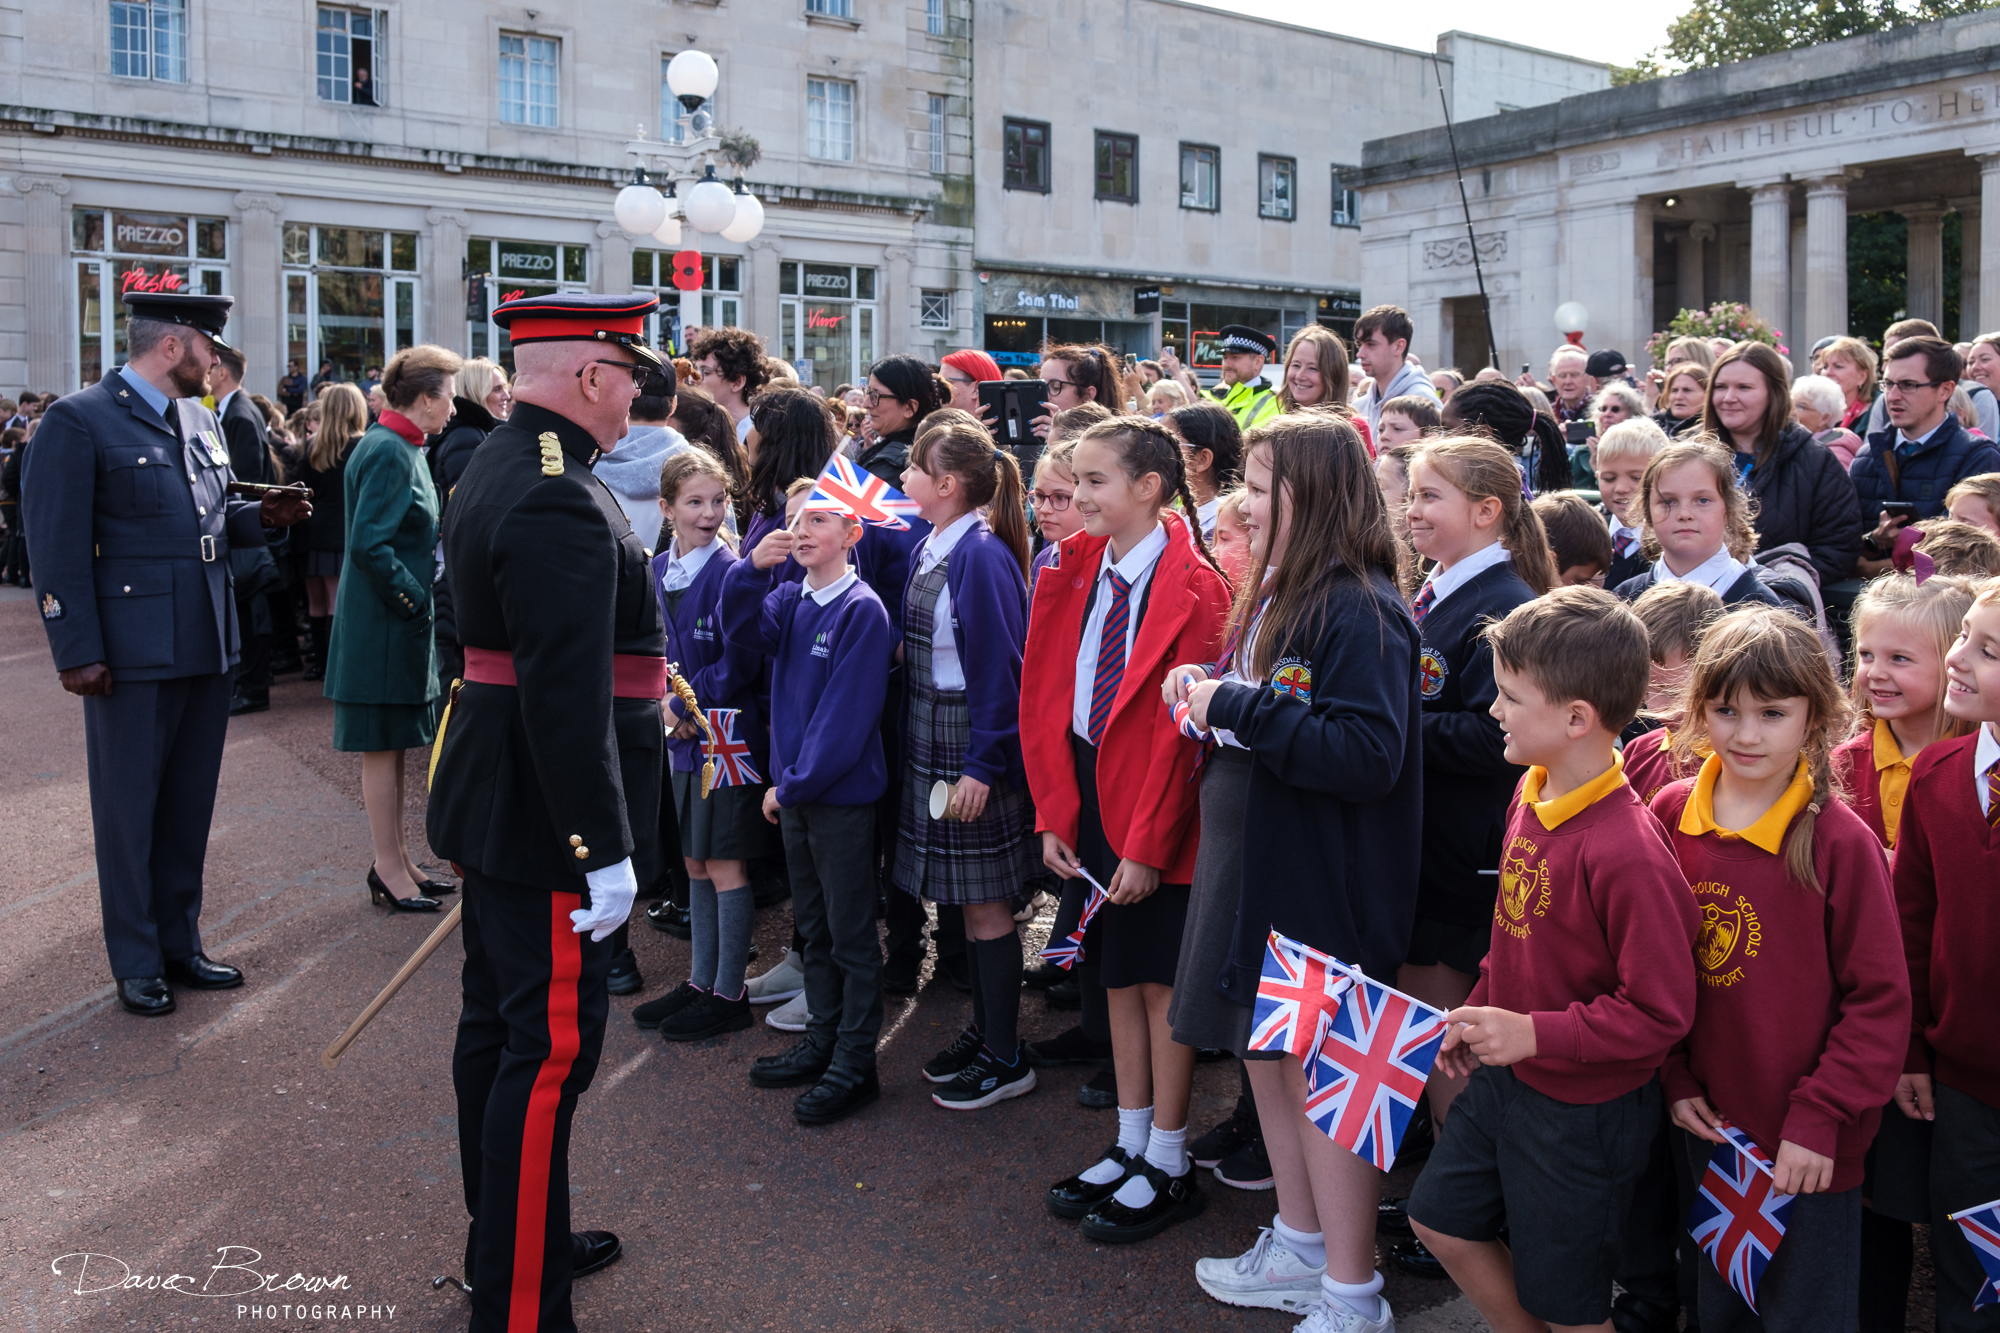 Princess Anne visited Southport to lead the centenary re-dedication of Southport War Memorial. Photo by Dave Brown Photography